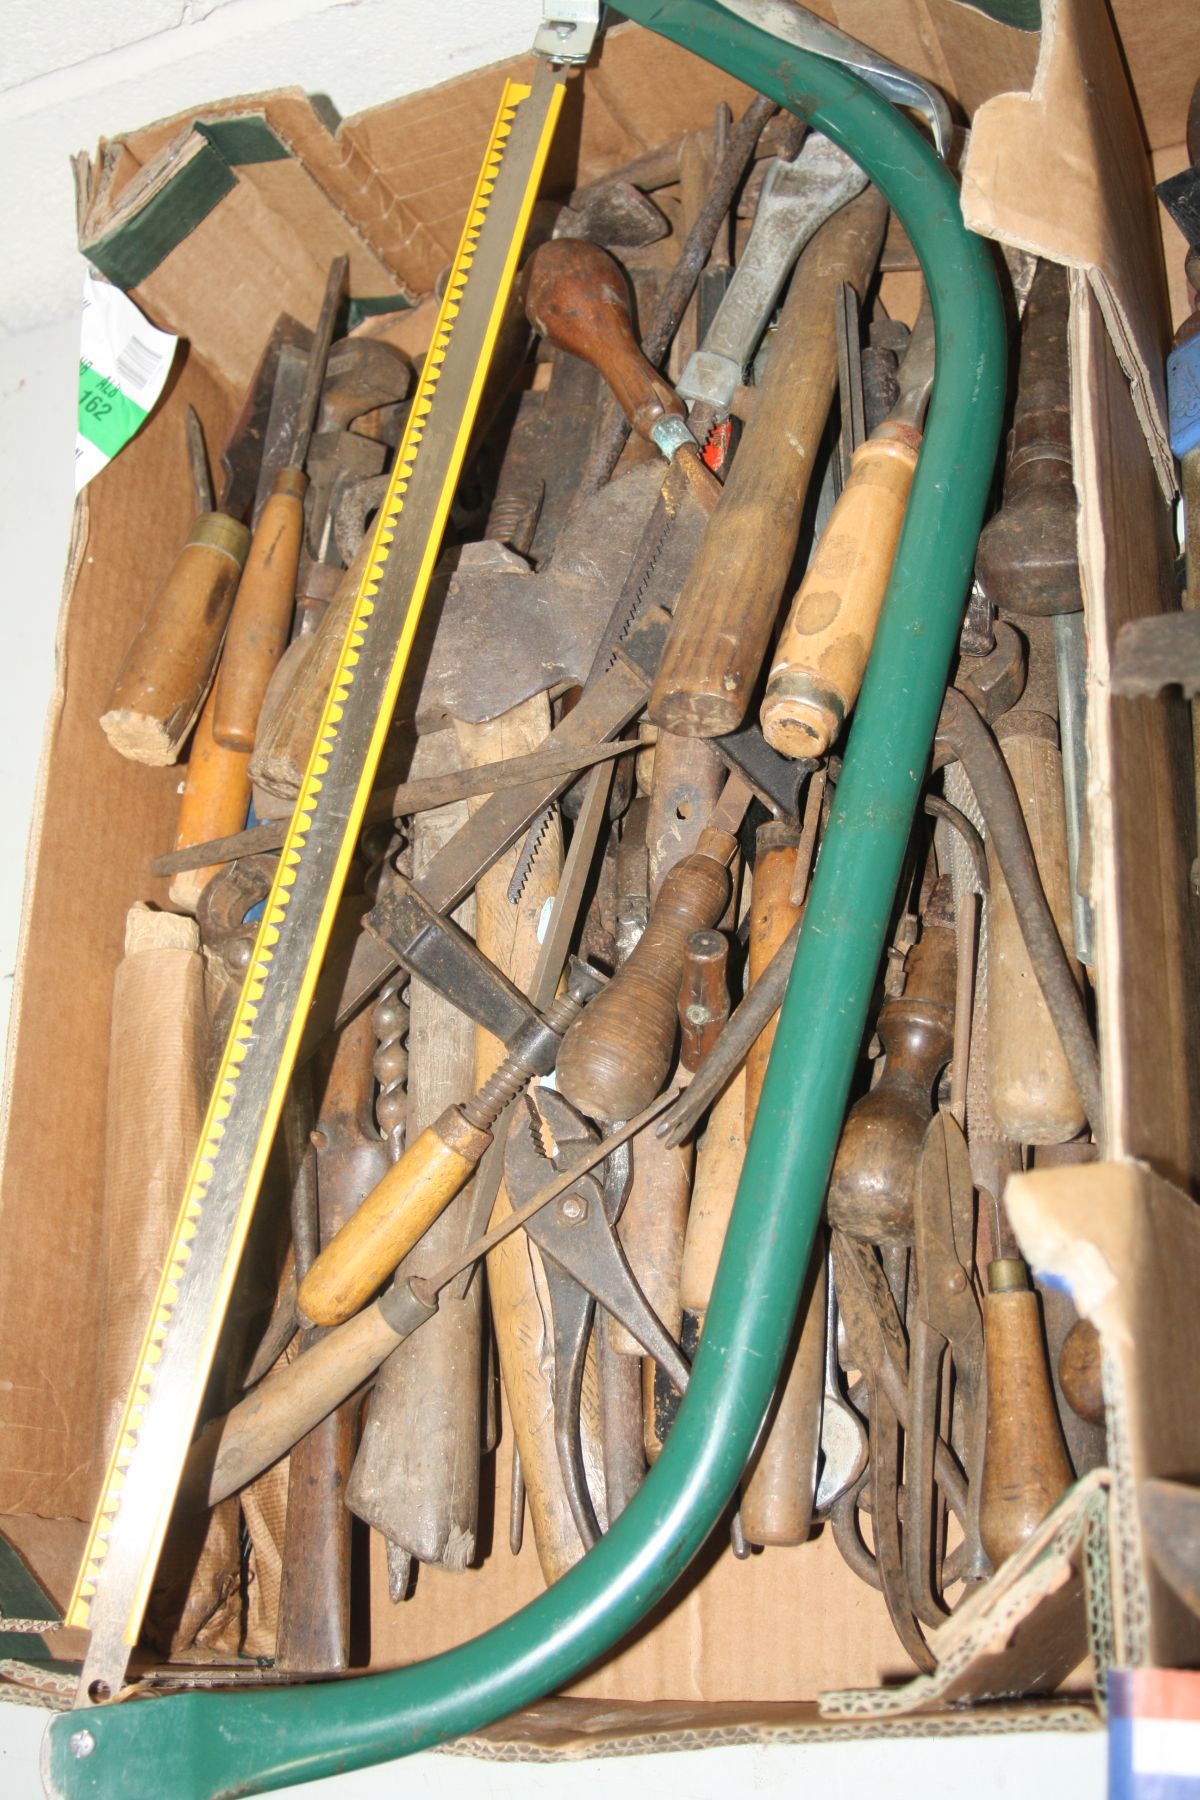 FIVE BOXES OF VARIOUS HAND TOOLS, to include planes, saws, hand sythes, files, chizels, hammers, - Image 9 of 14